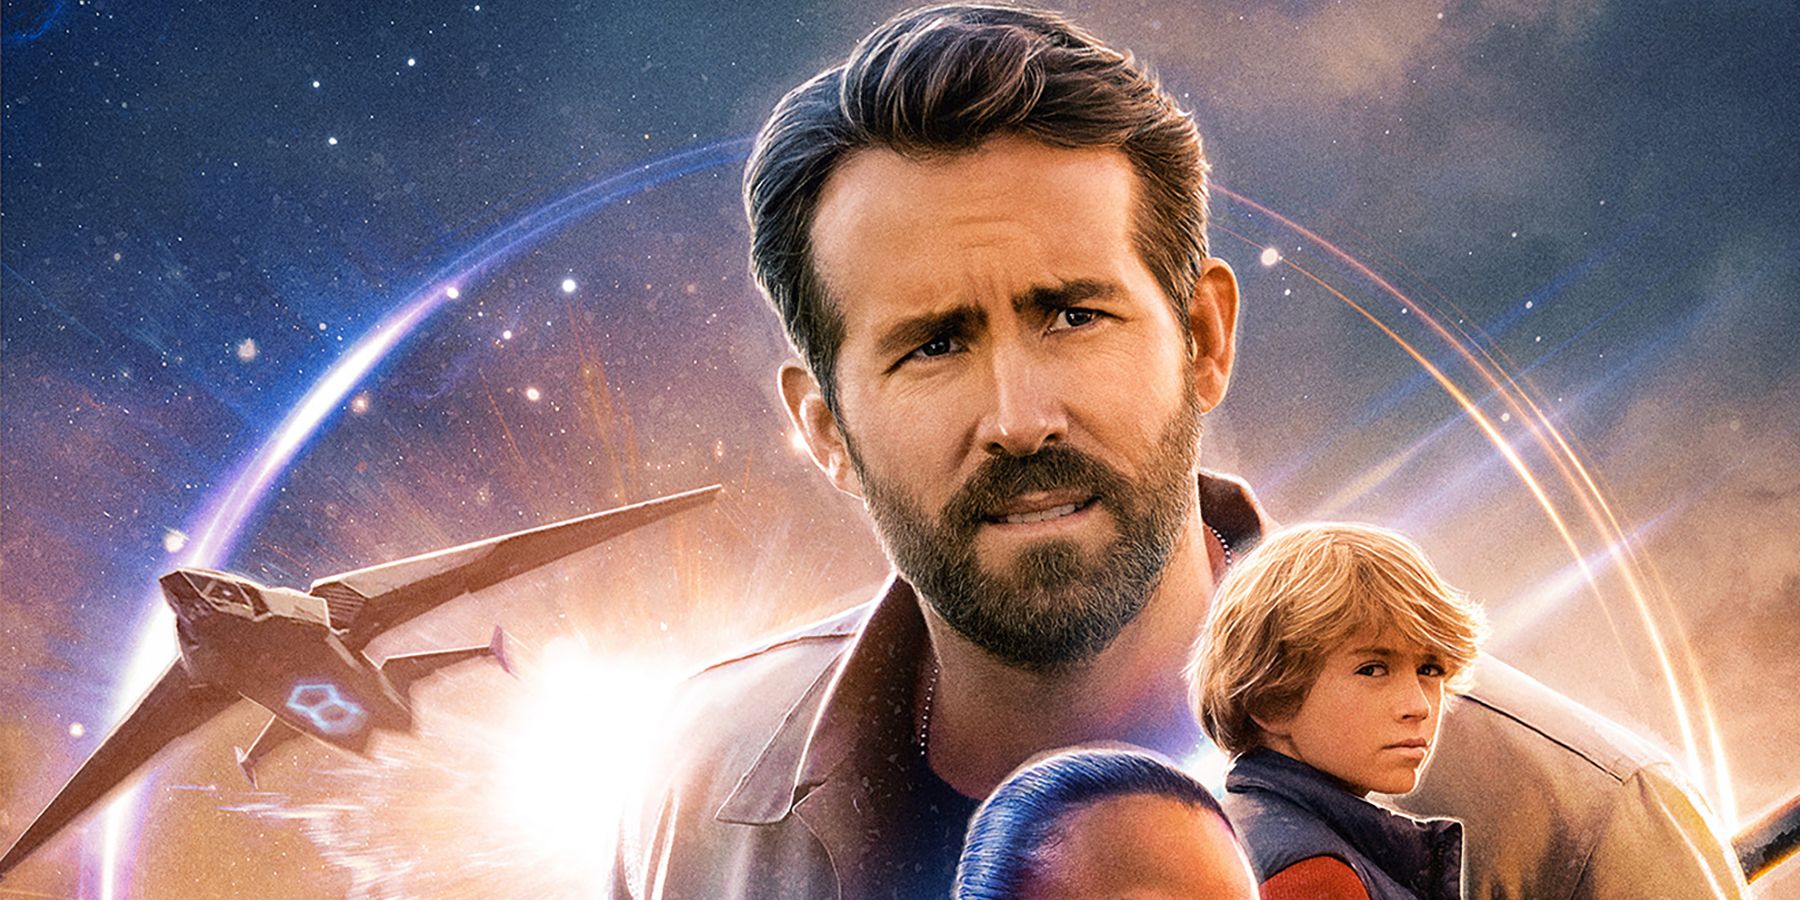 New The Adam Project Trailer Showcases Epic Action With Ryan Reynolds